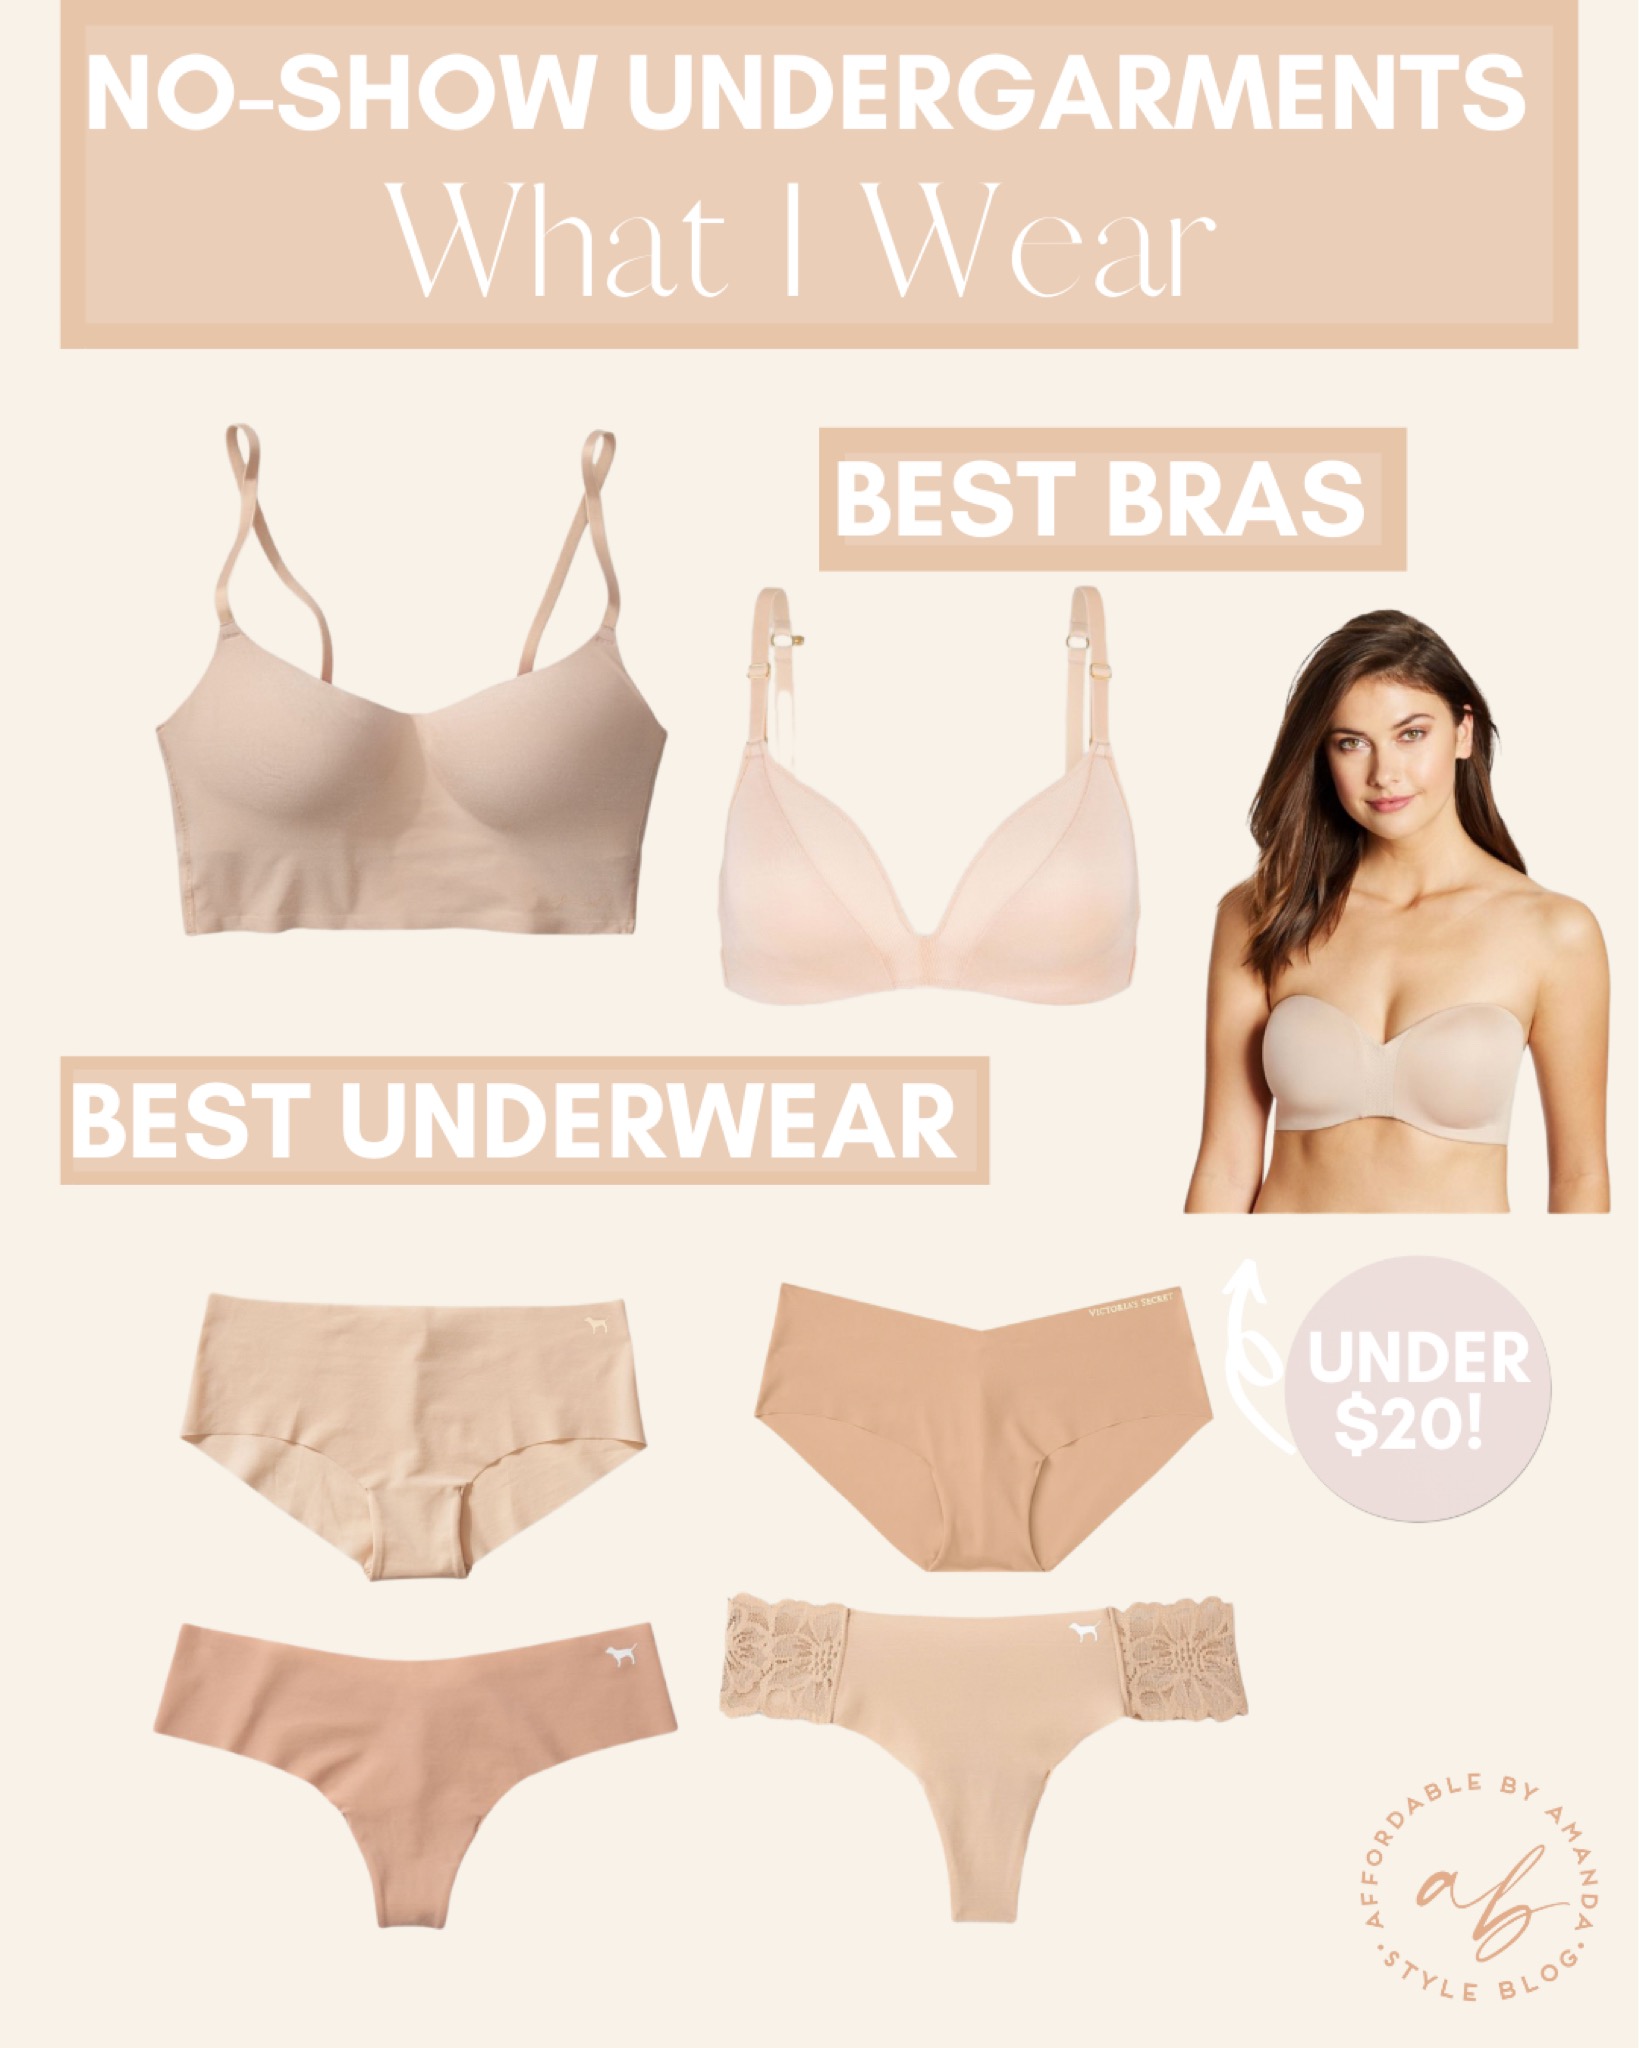 Best No-Show Undergarments - Affordable by Amanda